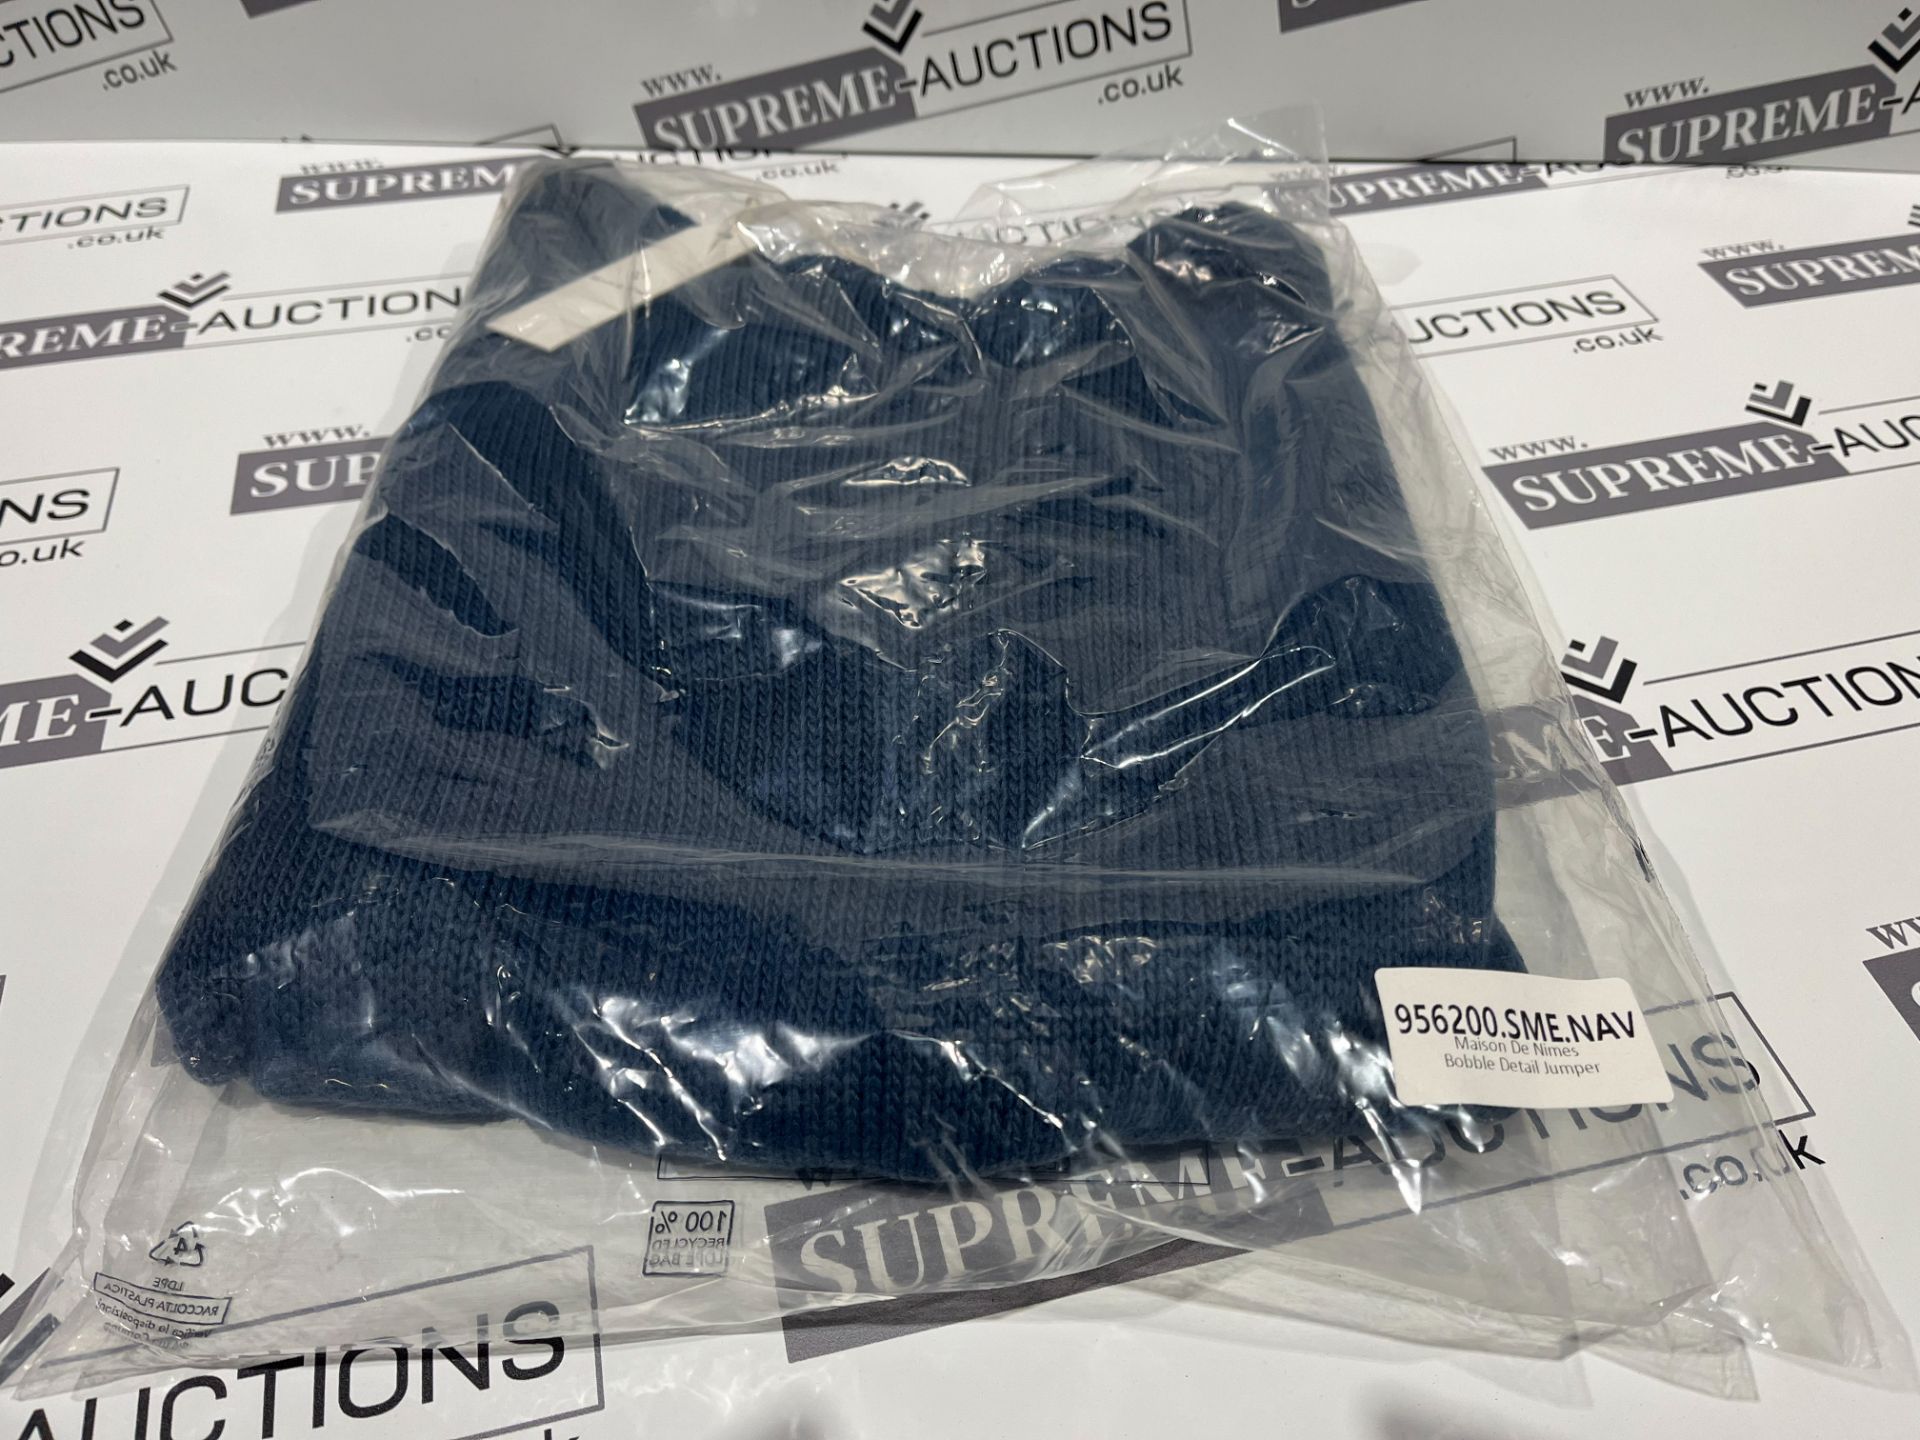 15 X BRAND NEW MAISON DE NIMES NAVY BOBBLE DETAIL JUMPERS SIZE SMALL R3-2